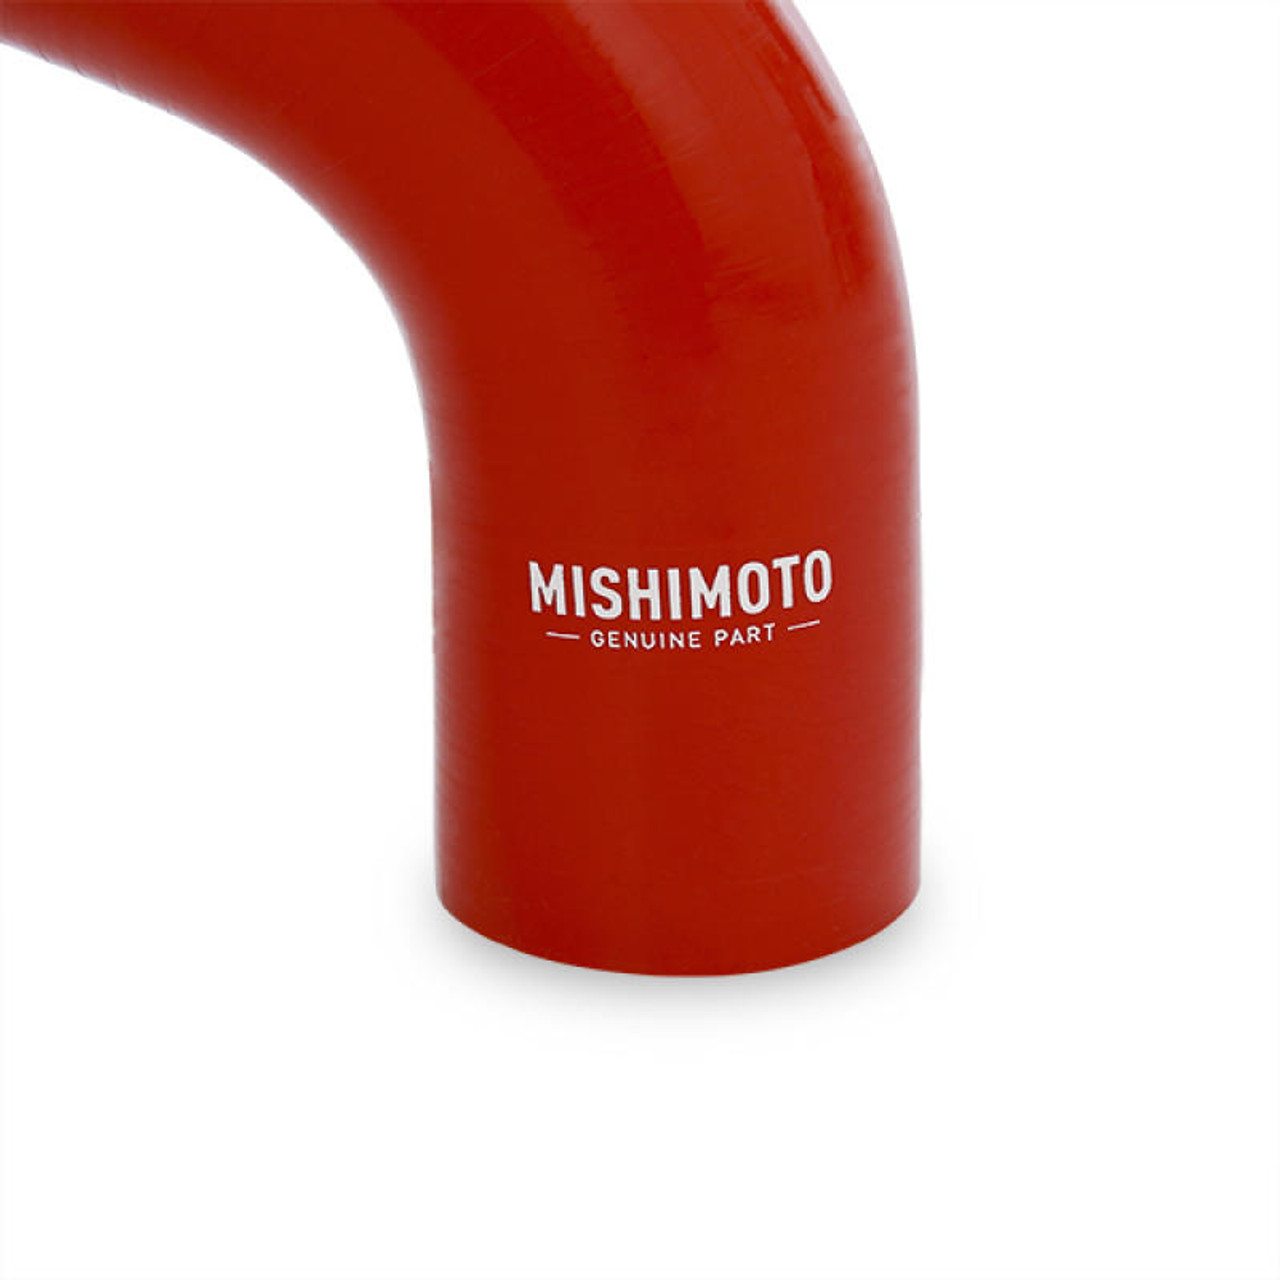 Mishimoto 2015 Dodge Challenger / Charger SRT Hellcat Silicone Radiator Hose Kit - Red - MMHOSE-MOP62-15RD